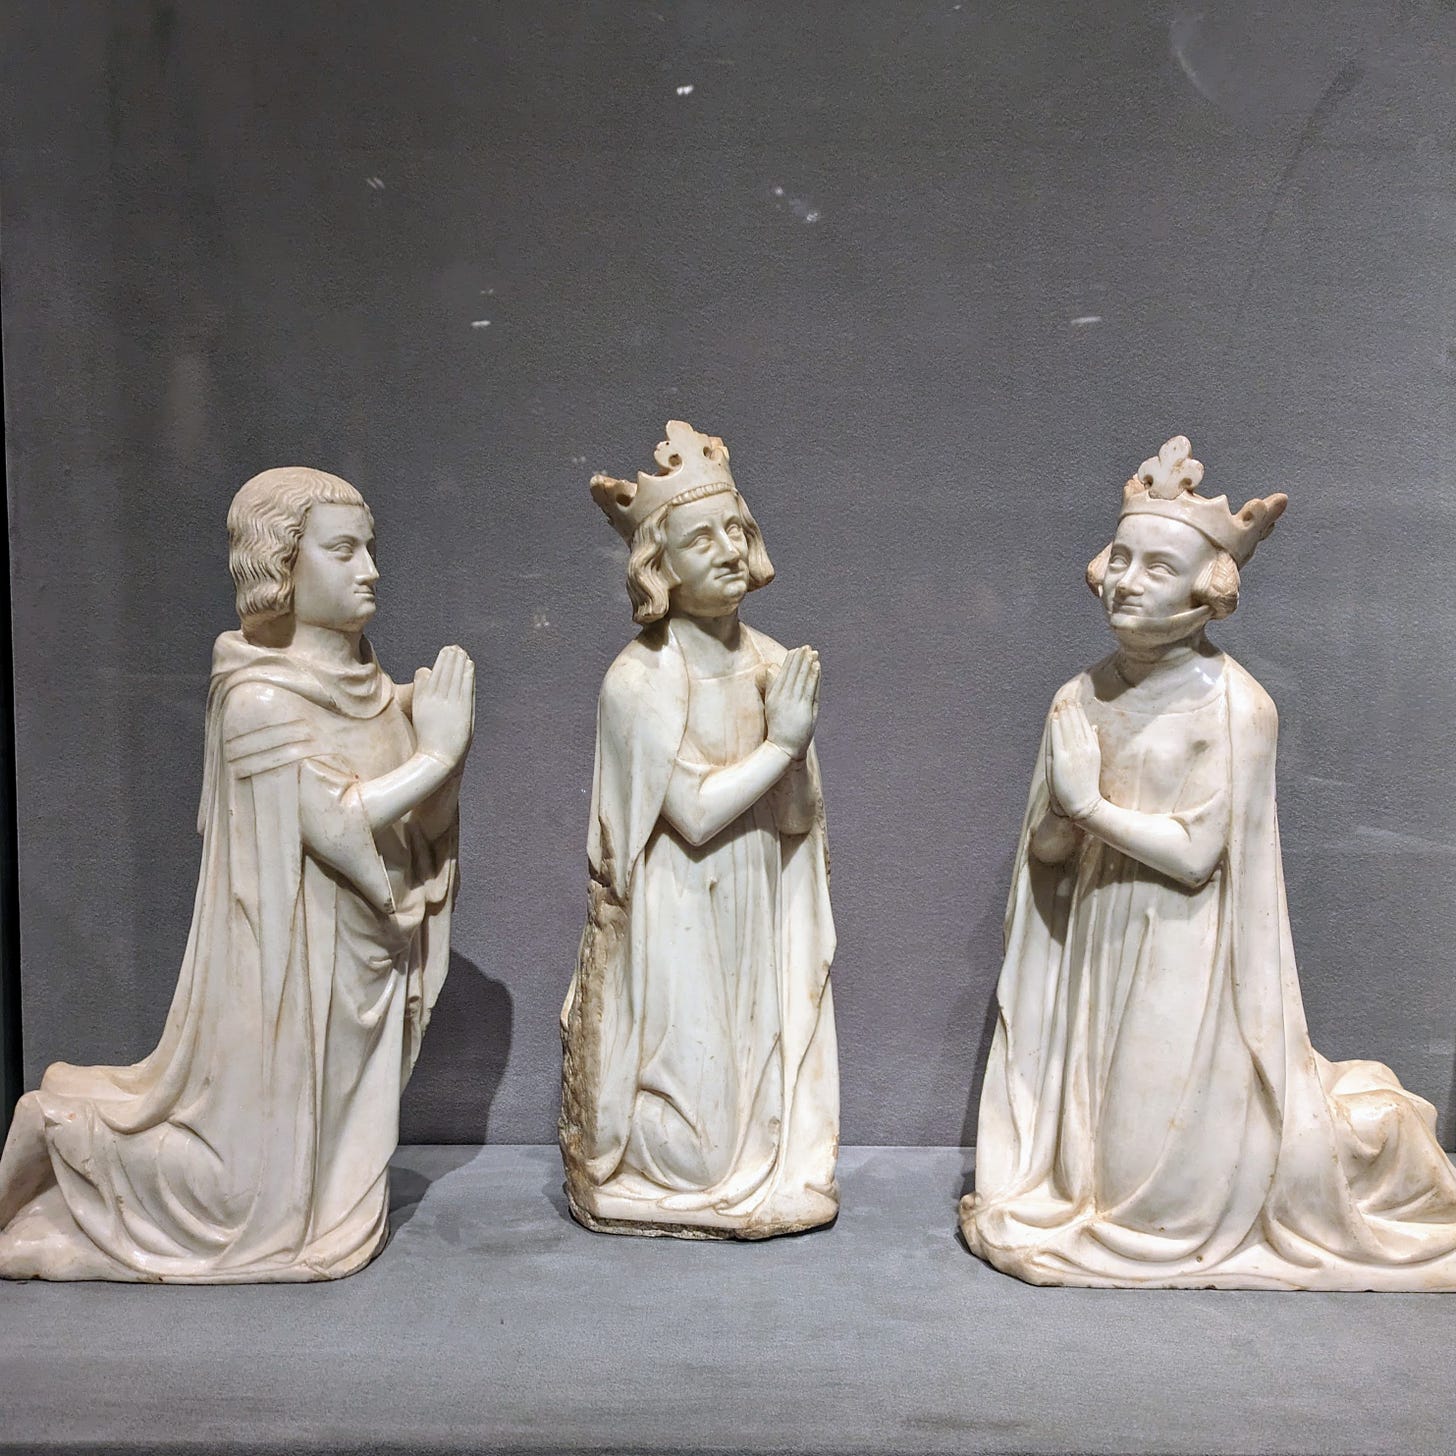 Photo of a museum vitrine, lined with grey felt, with three kneeling figures in yellowed white marble, hand joined in prayer chest-height, from left to right: a young man with chin-length wavy hair, a king with chin-length wavy hair, both looking to the right of the picture, and a queen with two ear-height buns of braided hair, looking to the left.